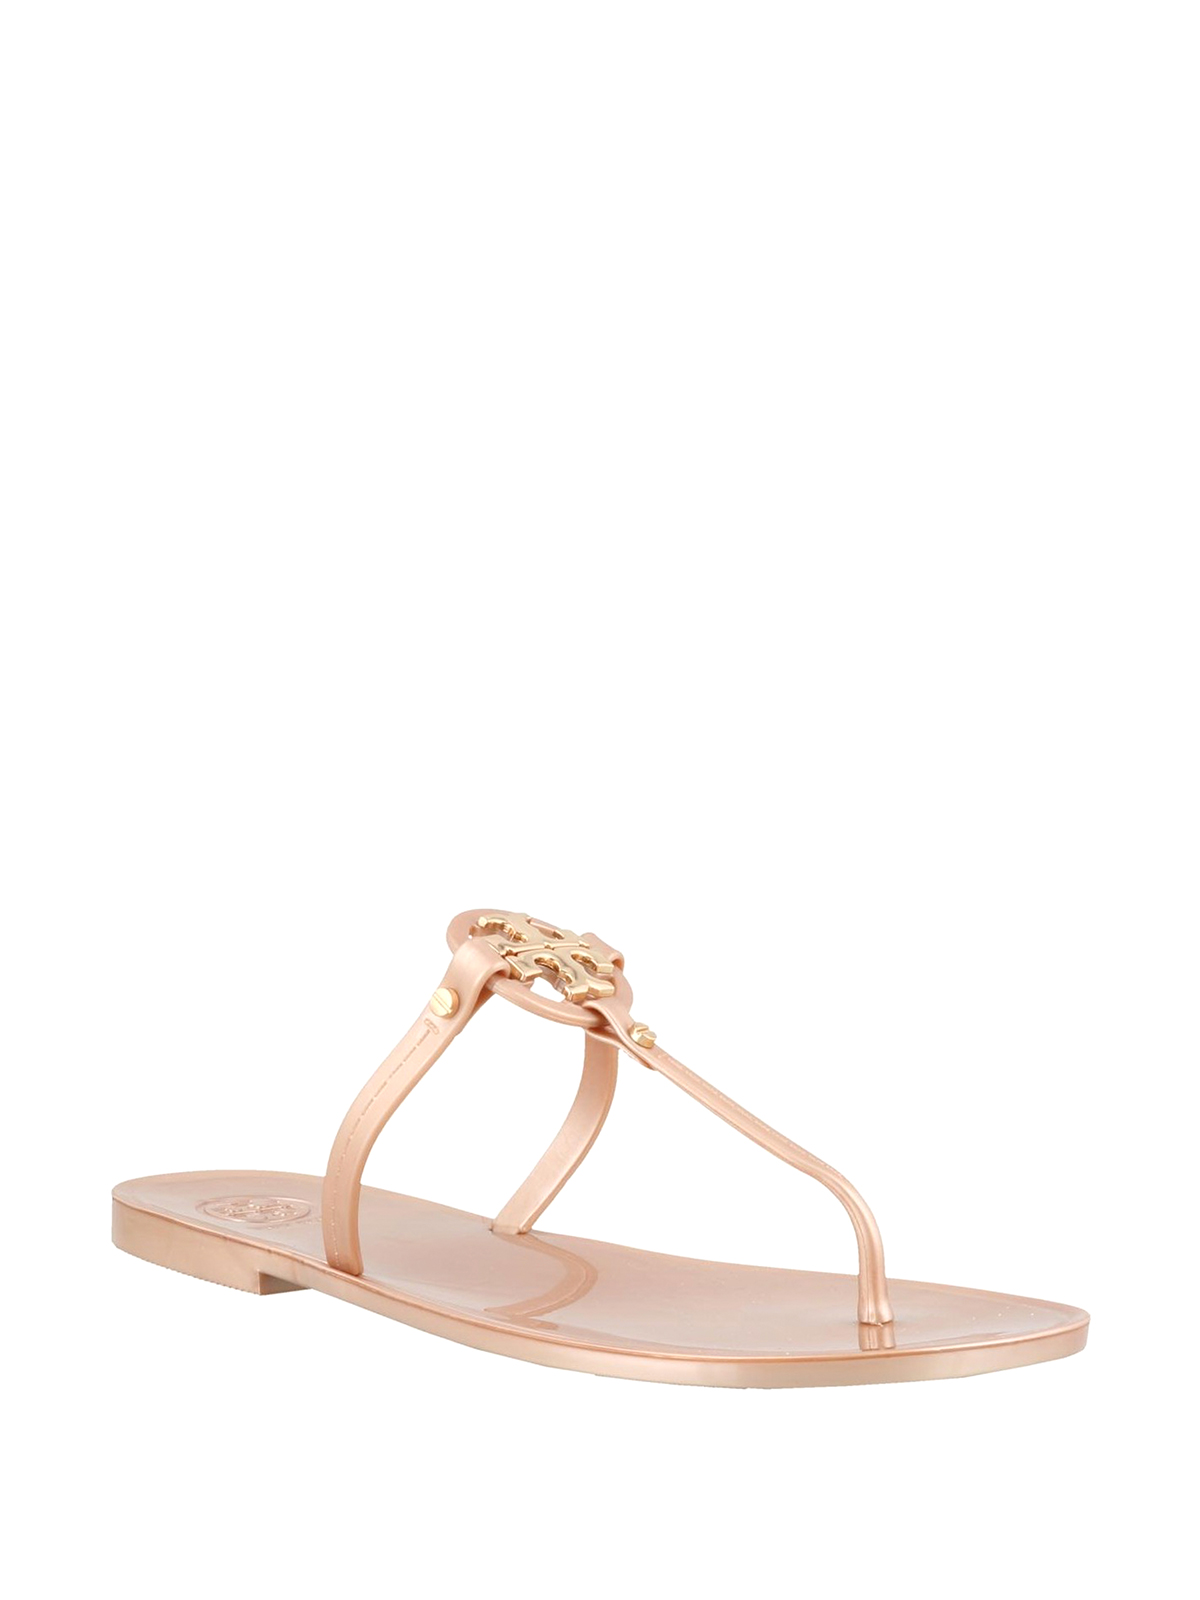 Tory Burch Mini Miller Jelly Thong Sandals In Pink Lyst | lupon.gov.ph